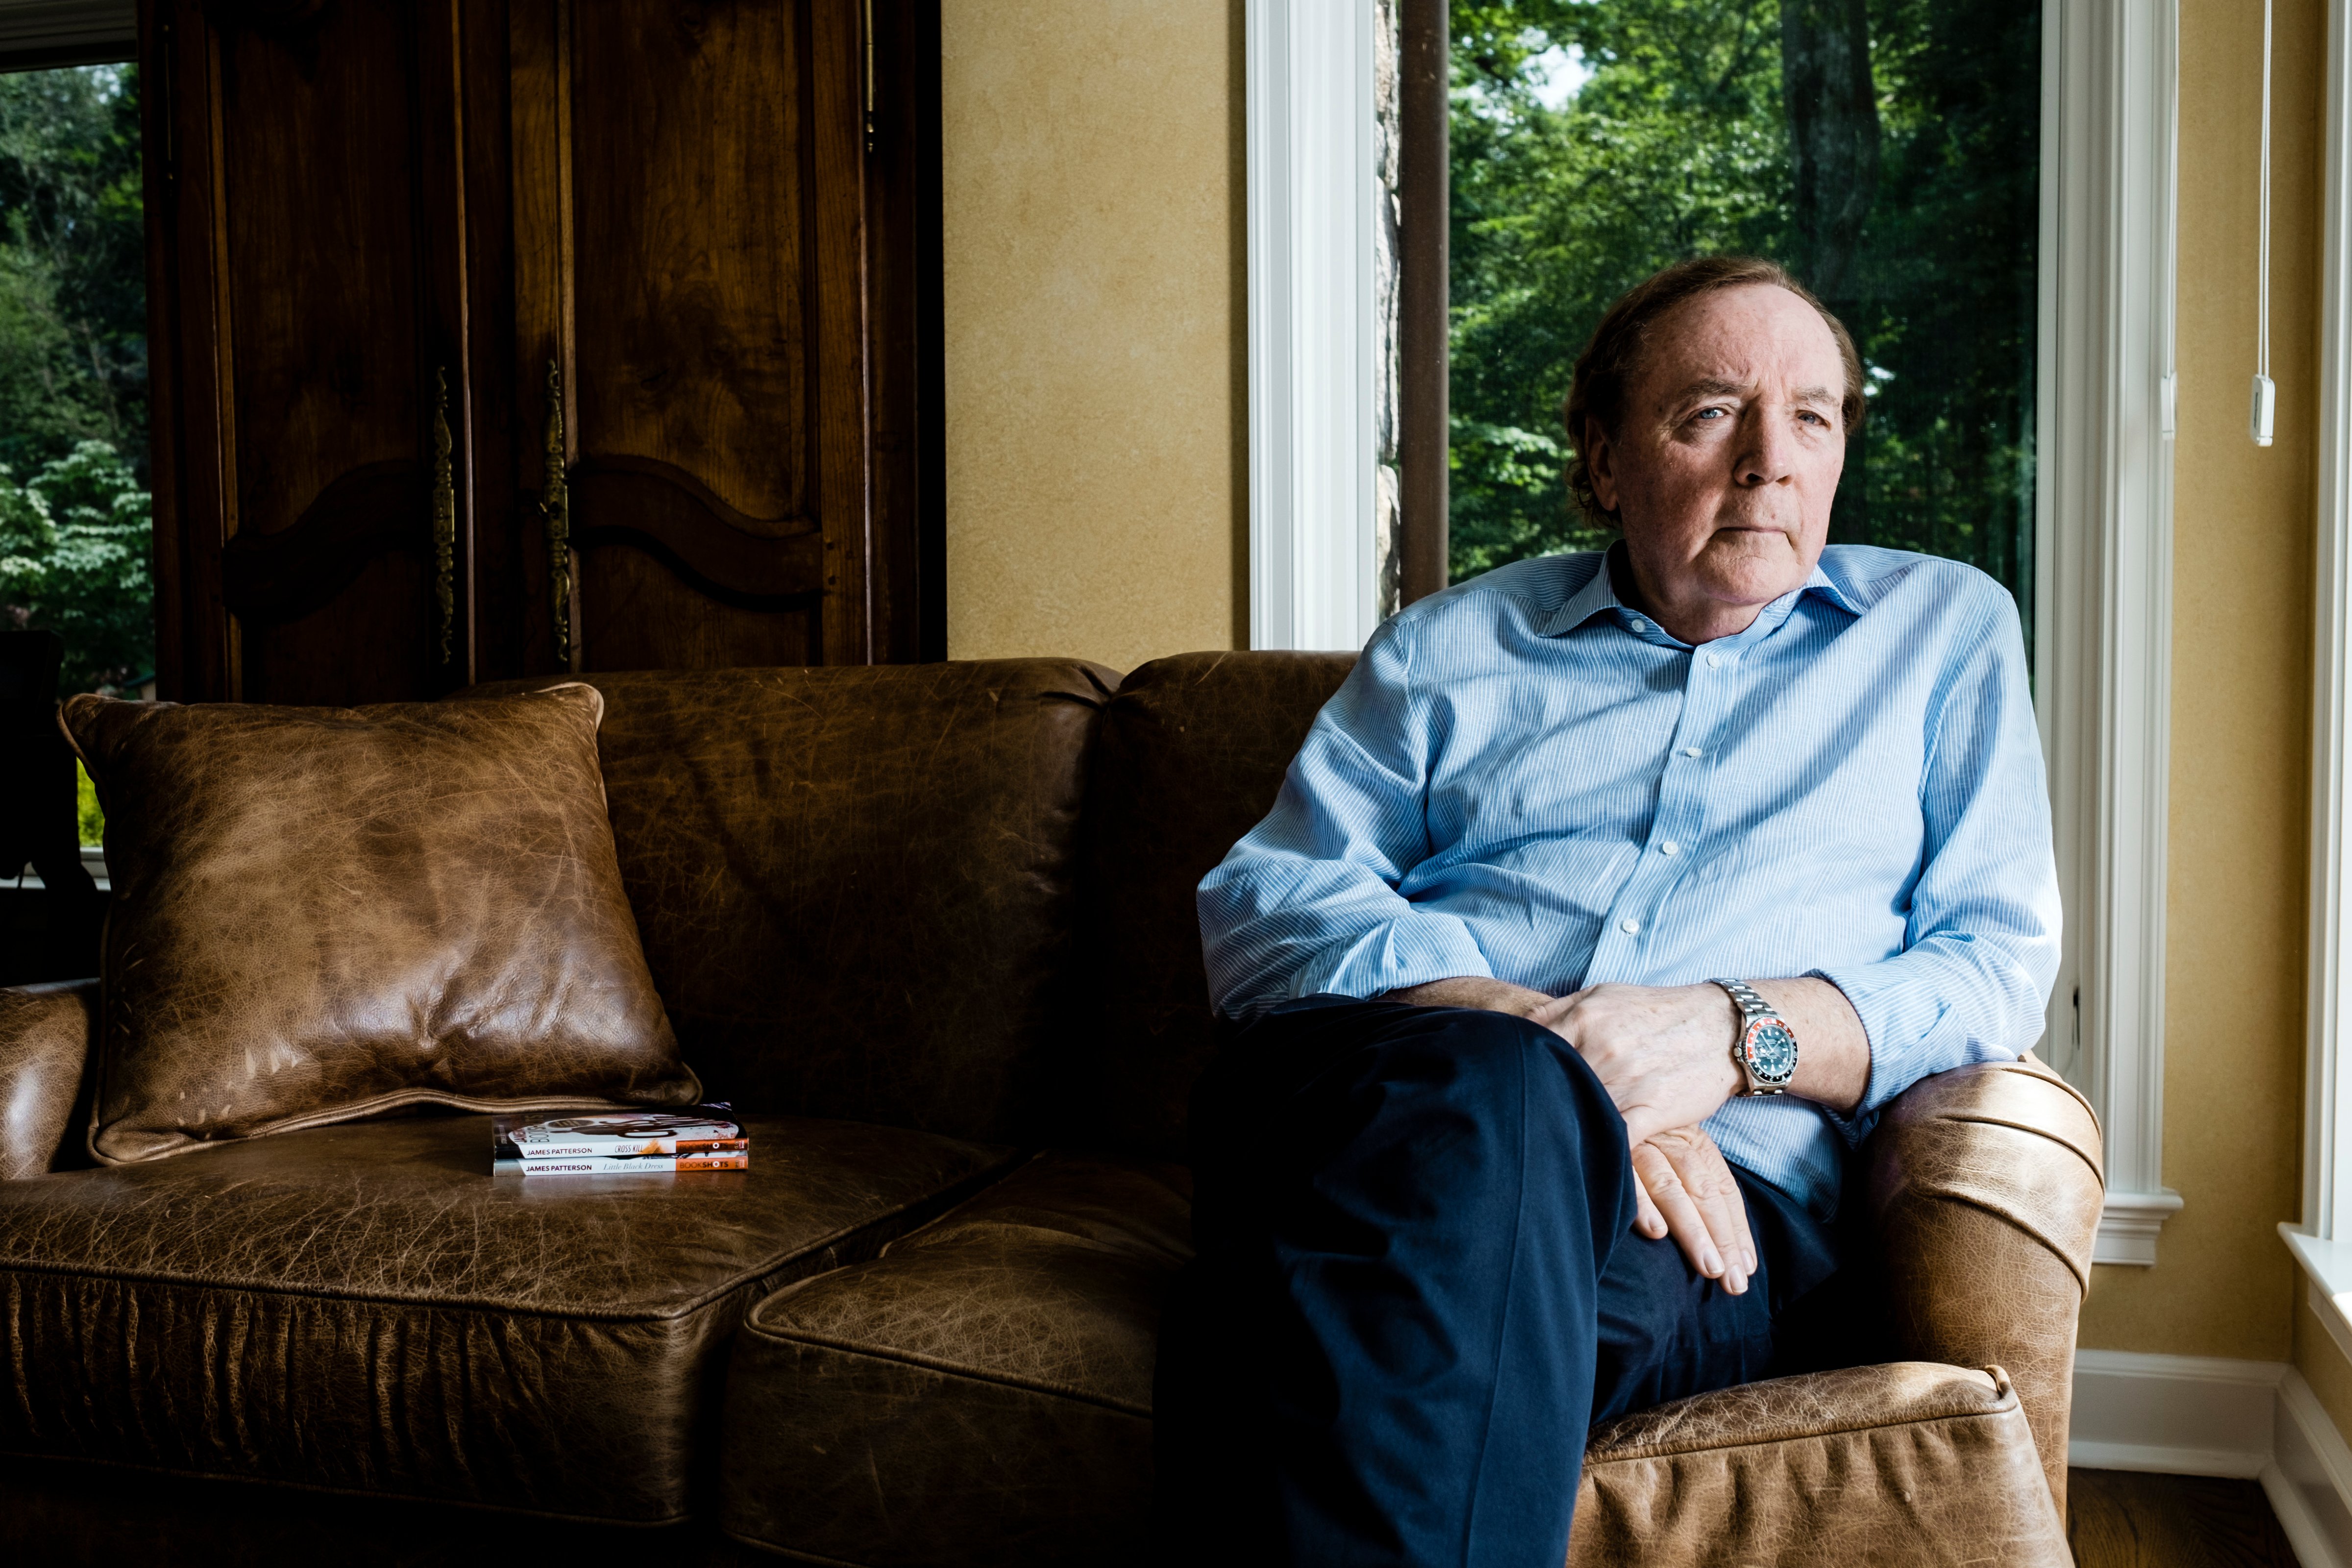 Bestselling author James Patterson photographed at his second home in Westchester County, New York. (Chris Sorensen&mdash;The Washington Post/Getty Images)